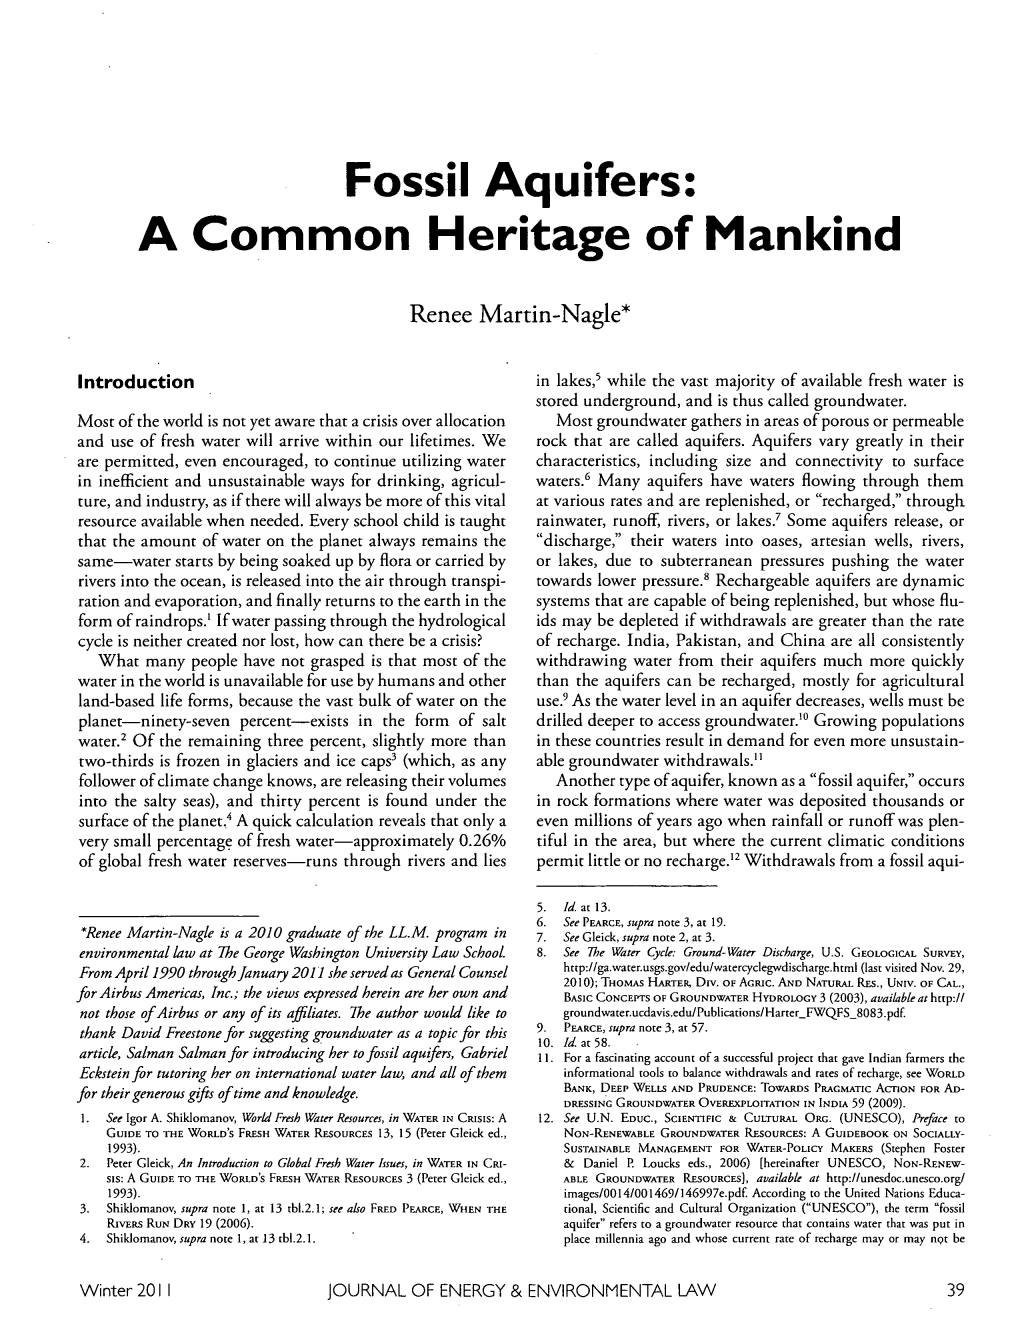 Fossil Aquifers: a Common Heritage of Mankind